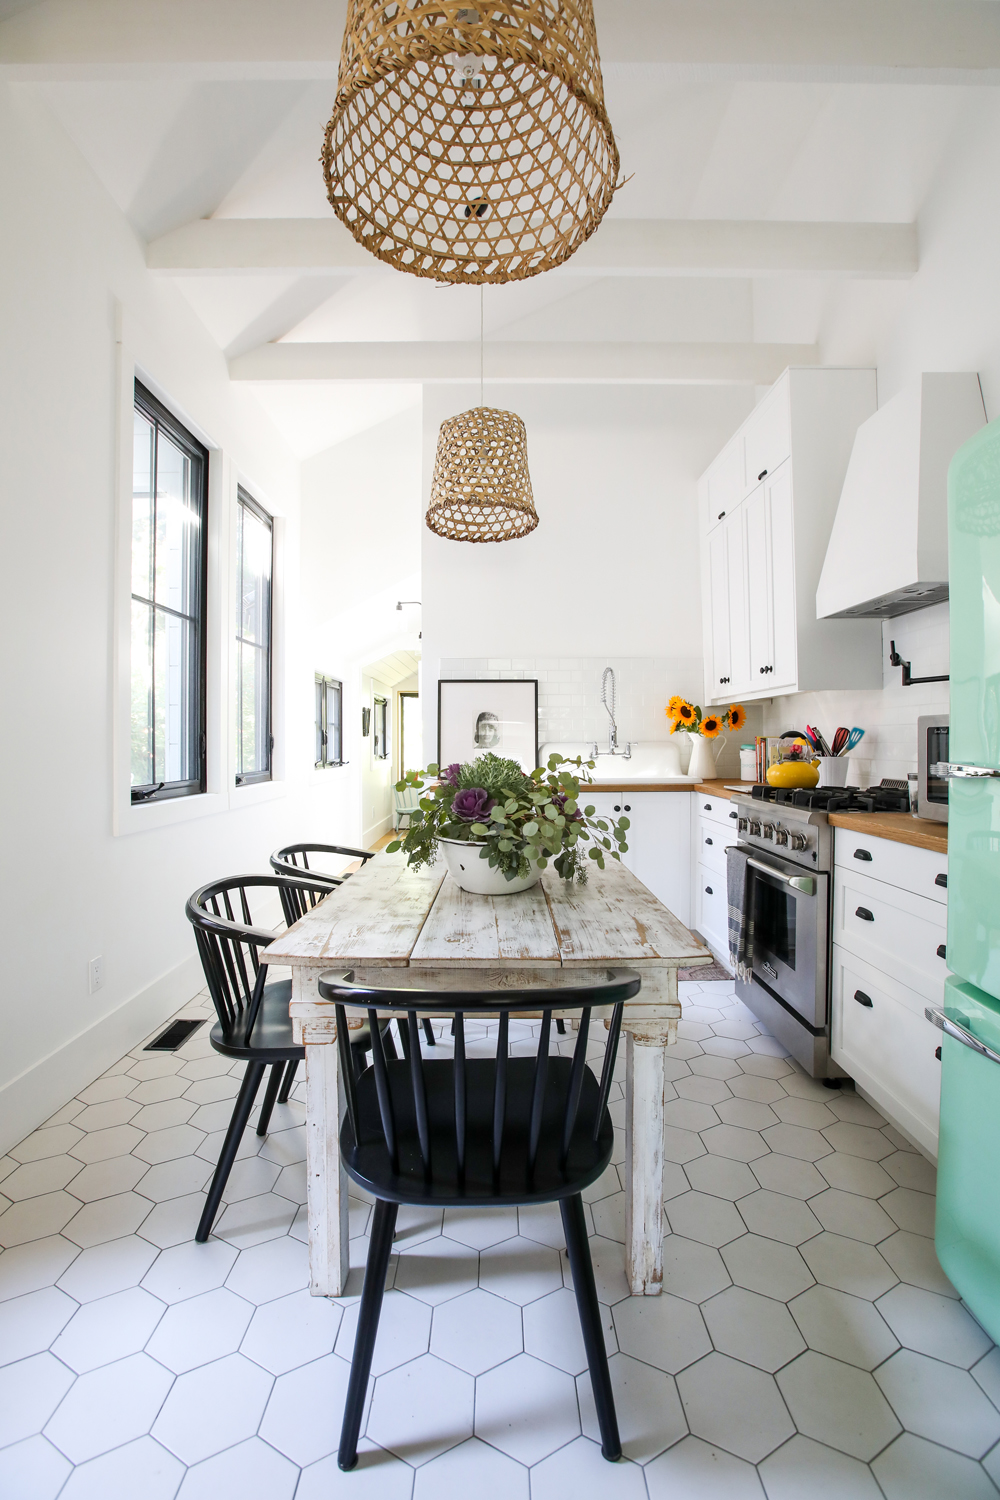 White rustic kitchen with geometric tile floor